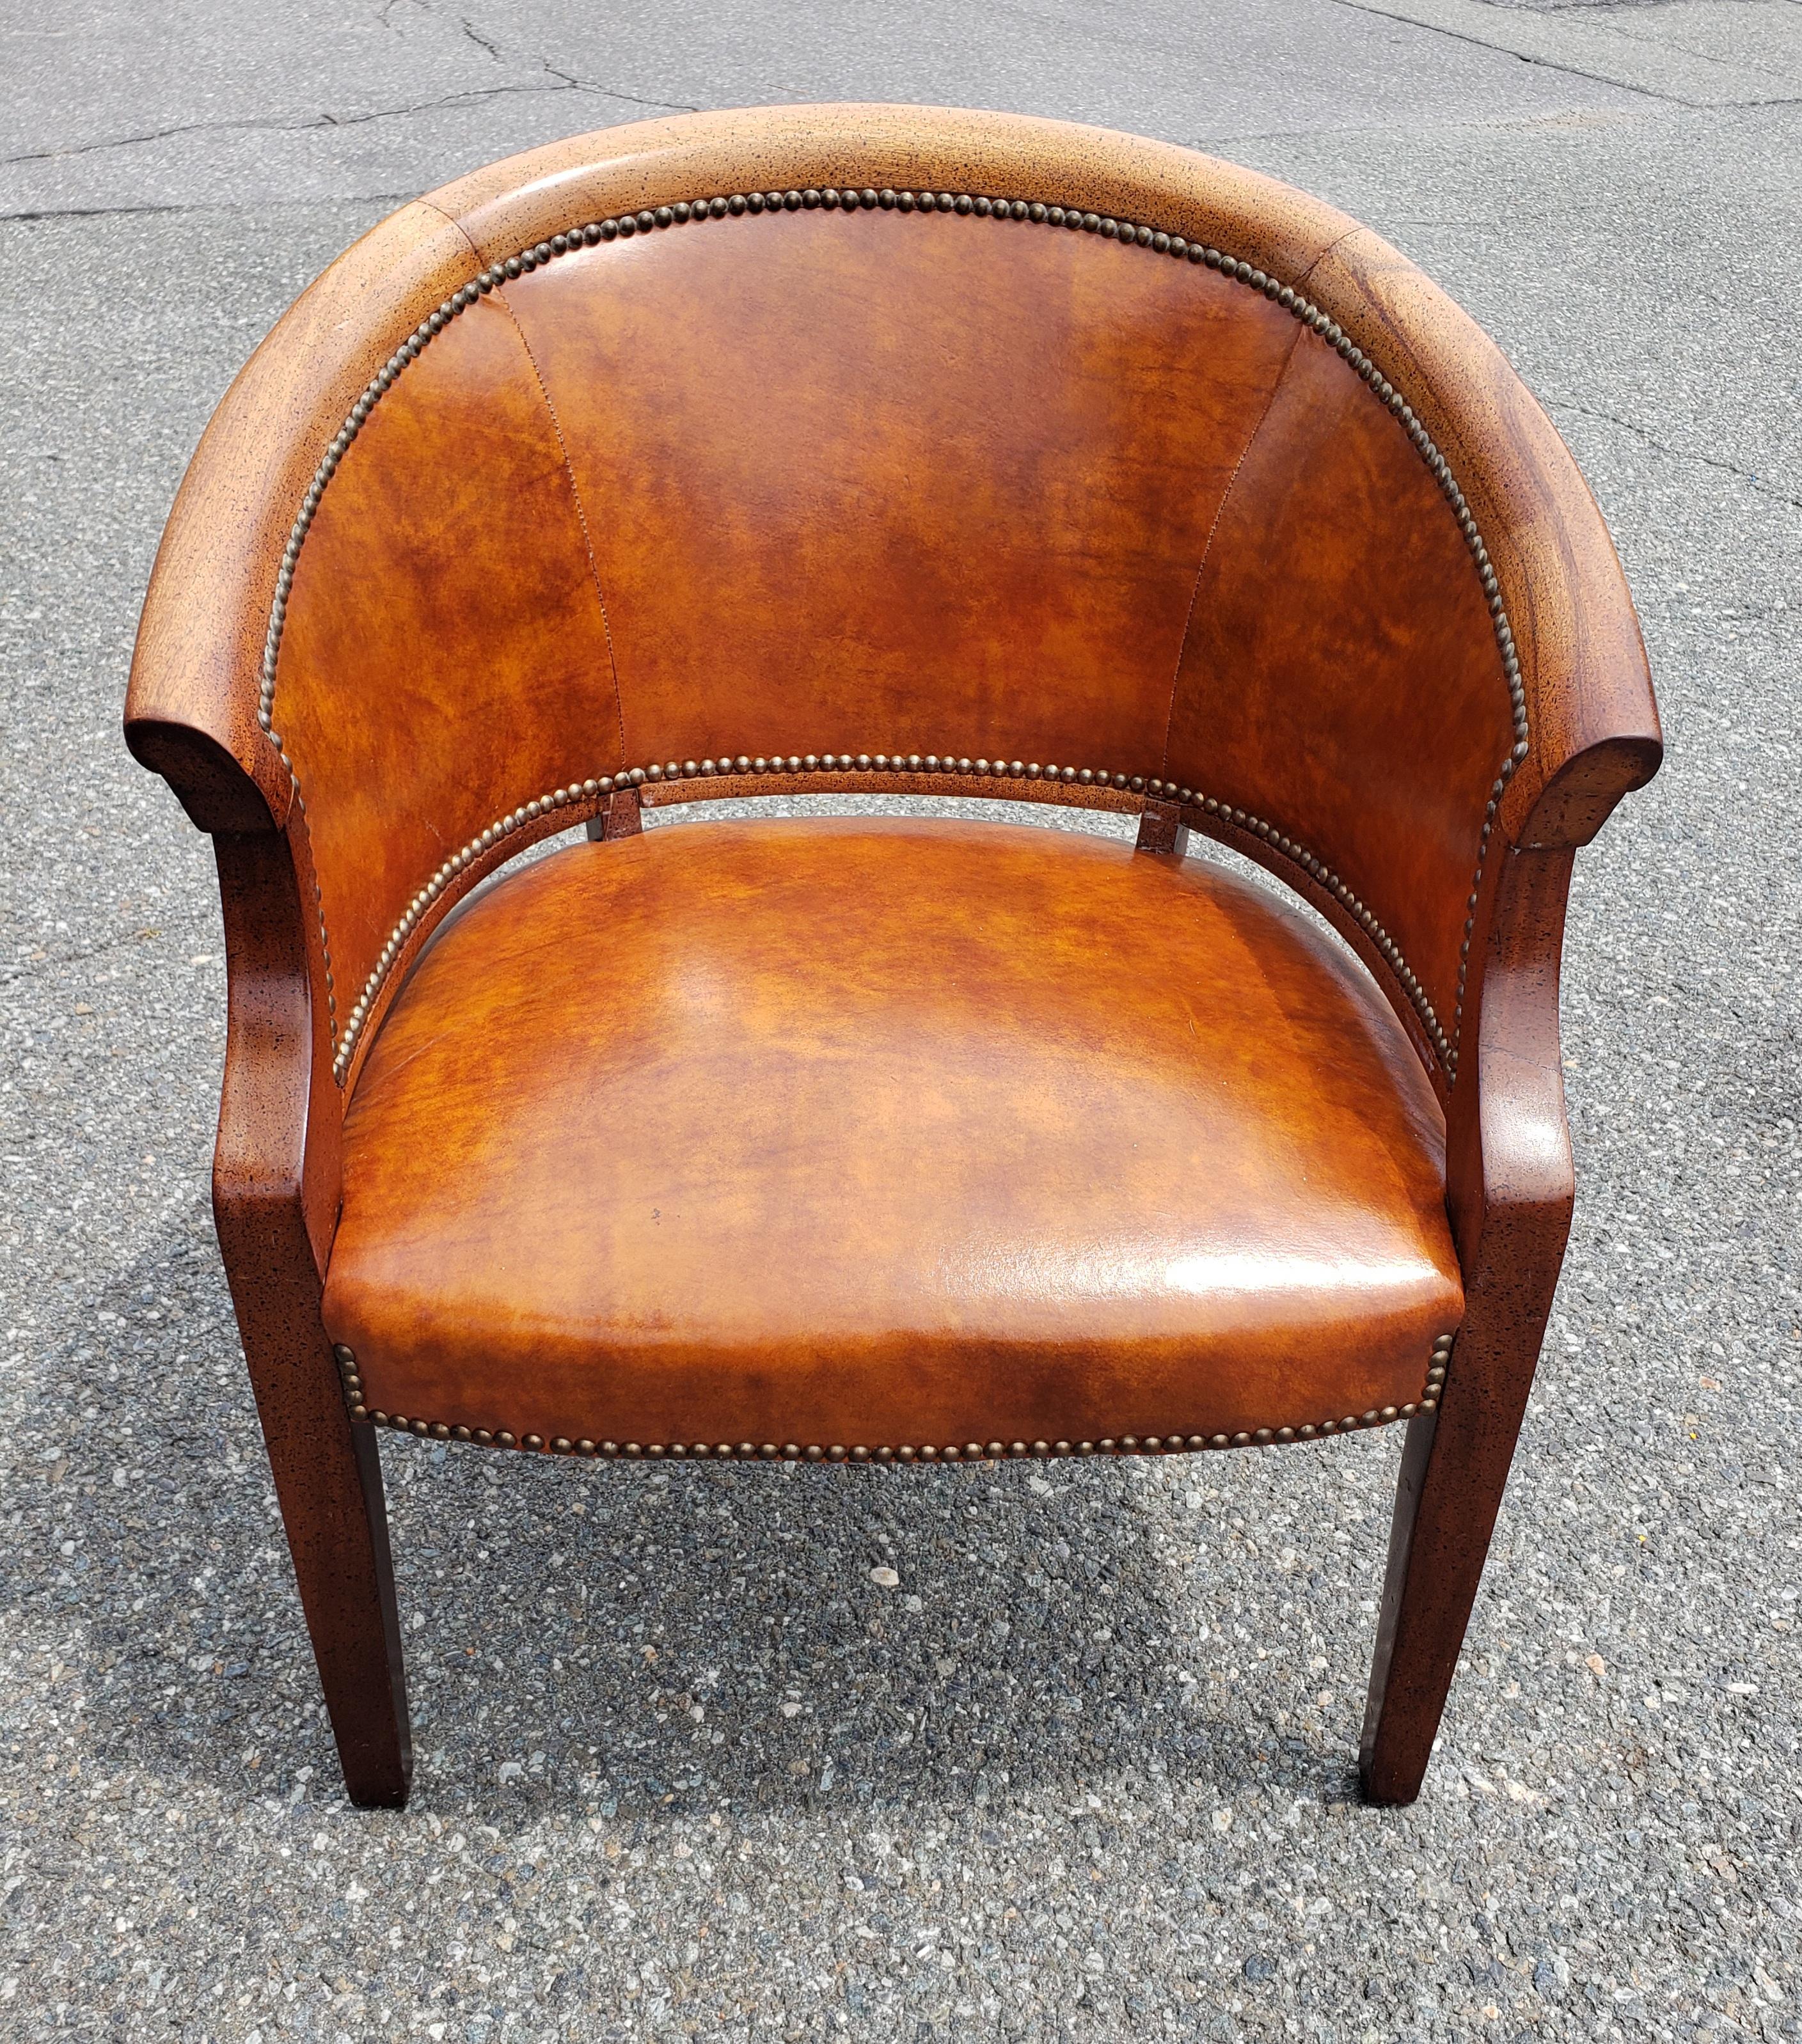 A magnificent Mid-Century, Top Grain Leather Barrel Back with NailHeads Trims desk Chair by Classic Furniture. Great vintage condition. Measures 27